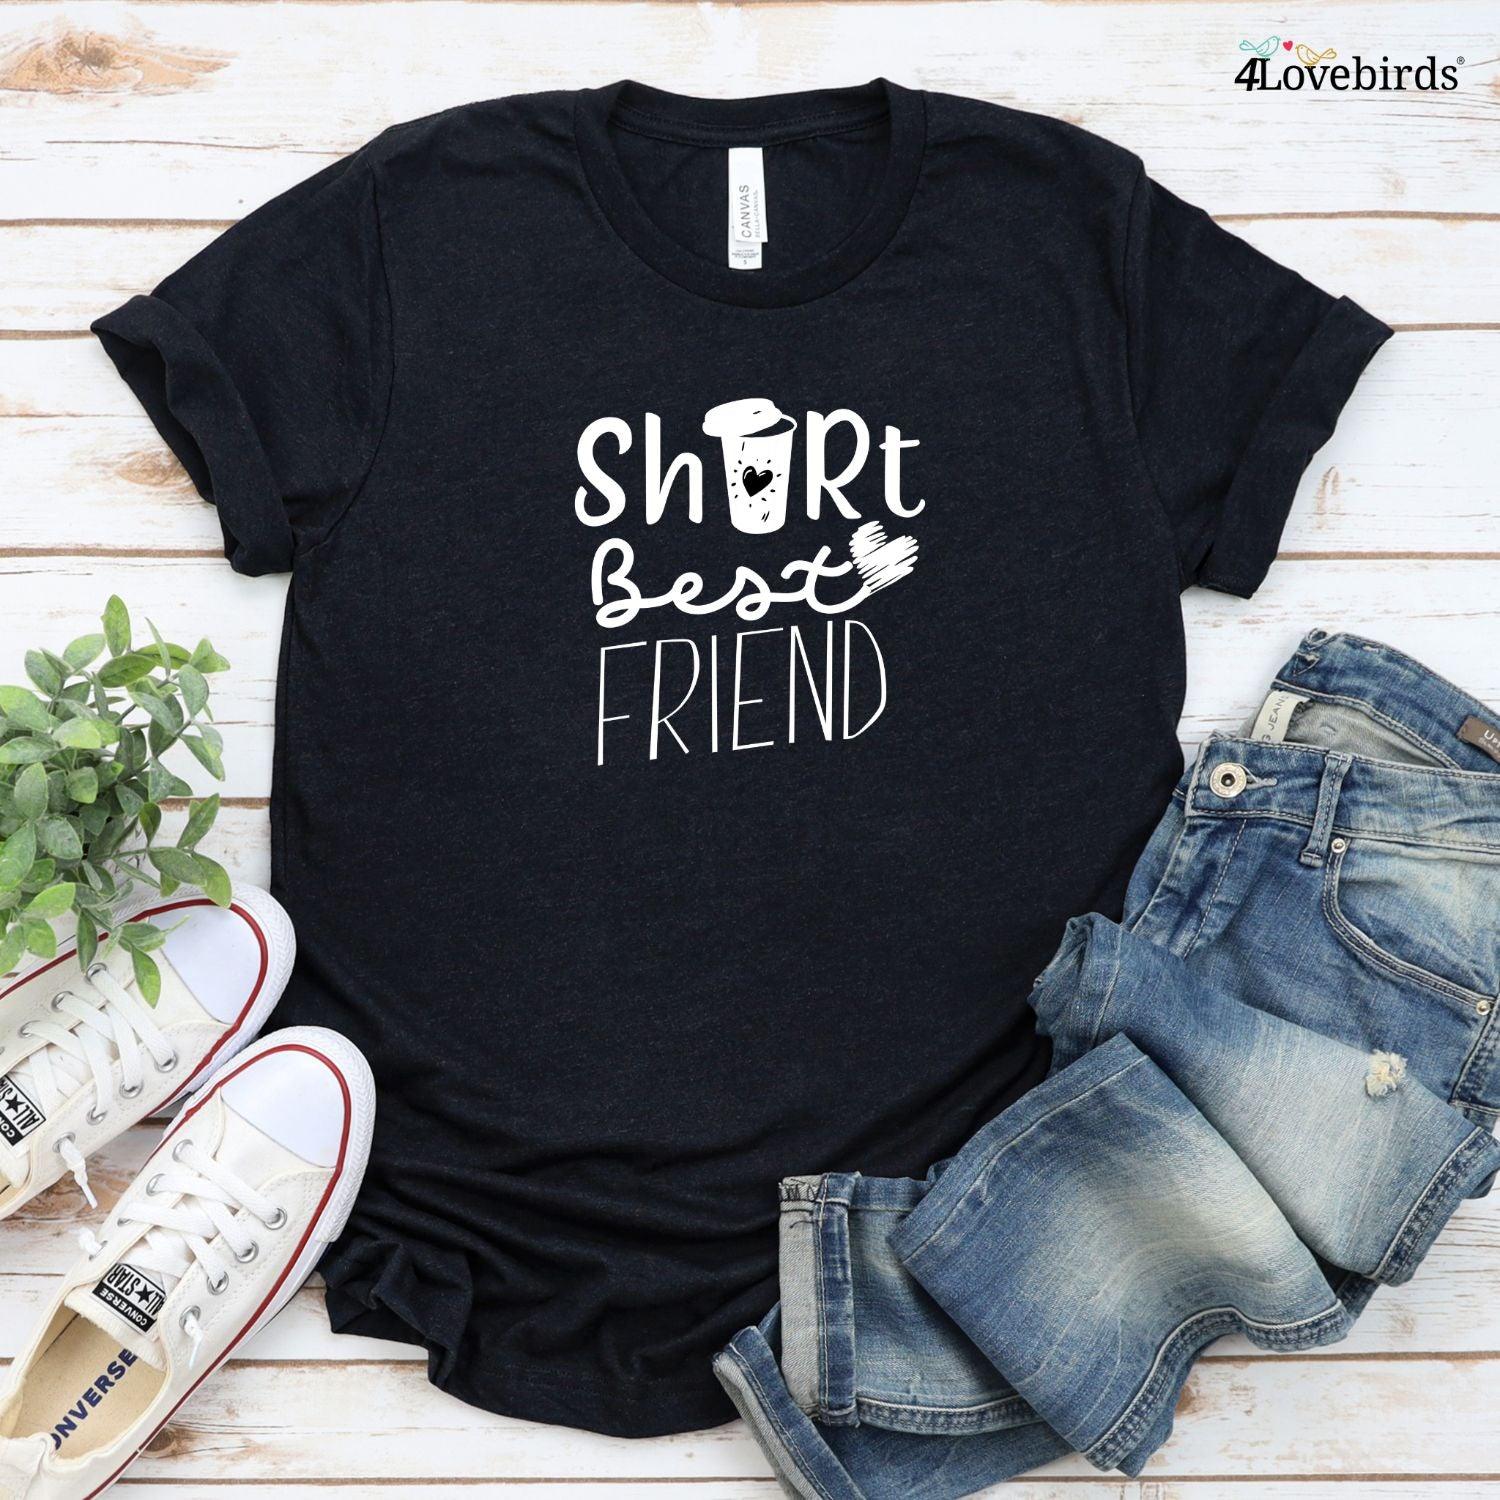 Matching Best Friend Shirts, Best Gifts for Friends Birthday, Sibling  Matching Outfits, Unisex Matching Friends Shirts, Unique Gifts 